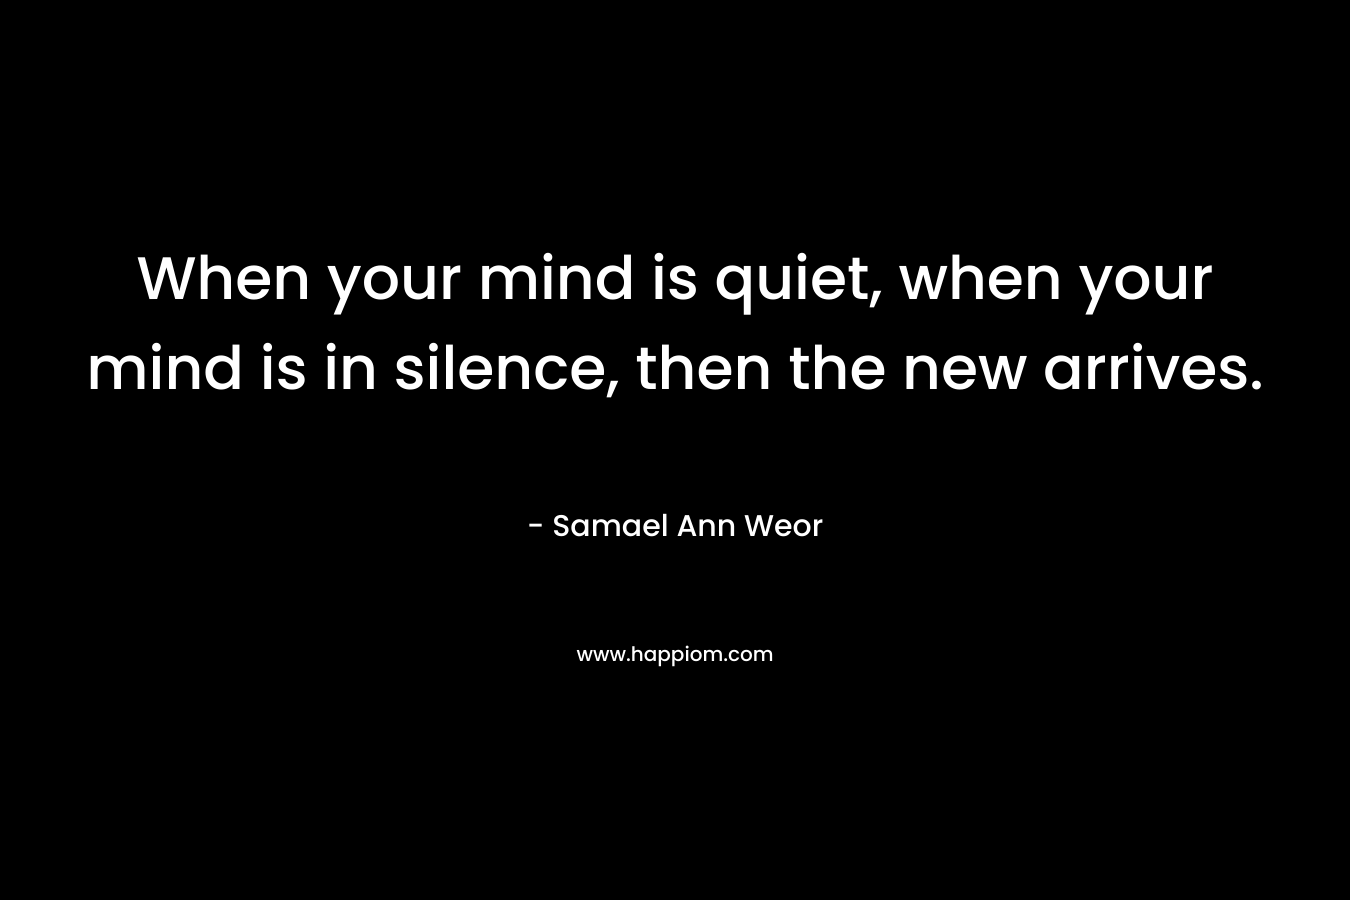 When your mind is quiet, when your mind is in silence, then the new arrives.